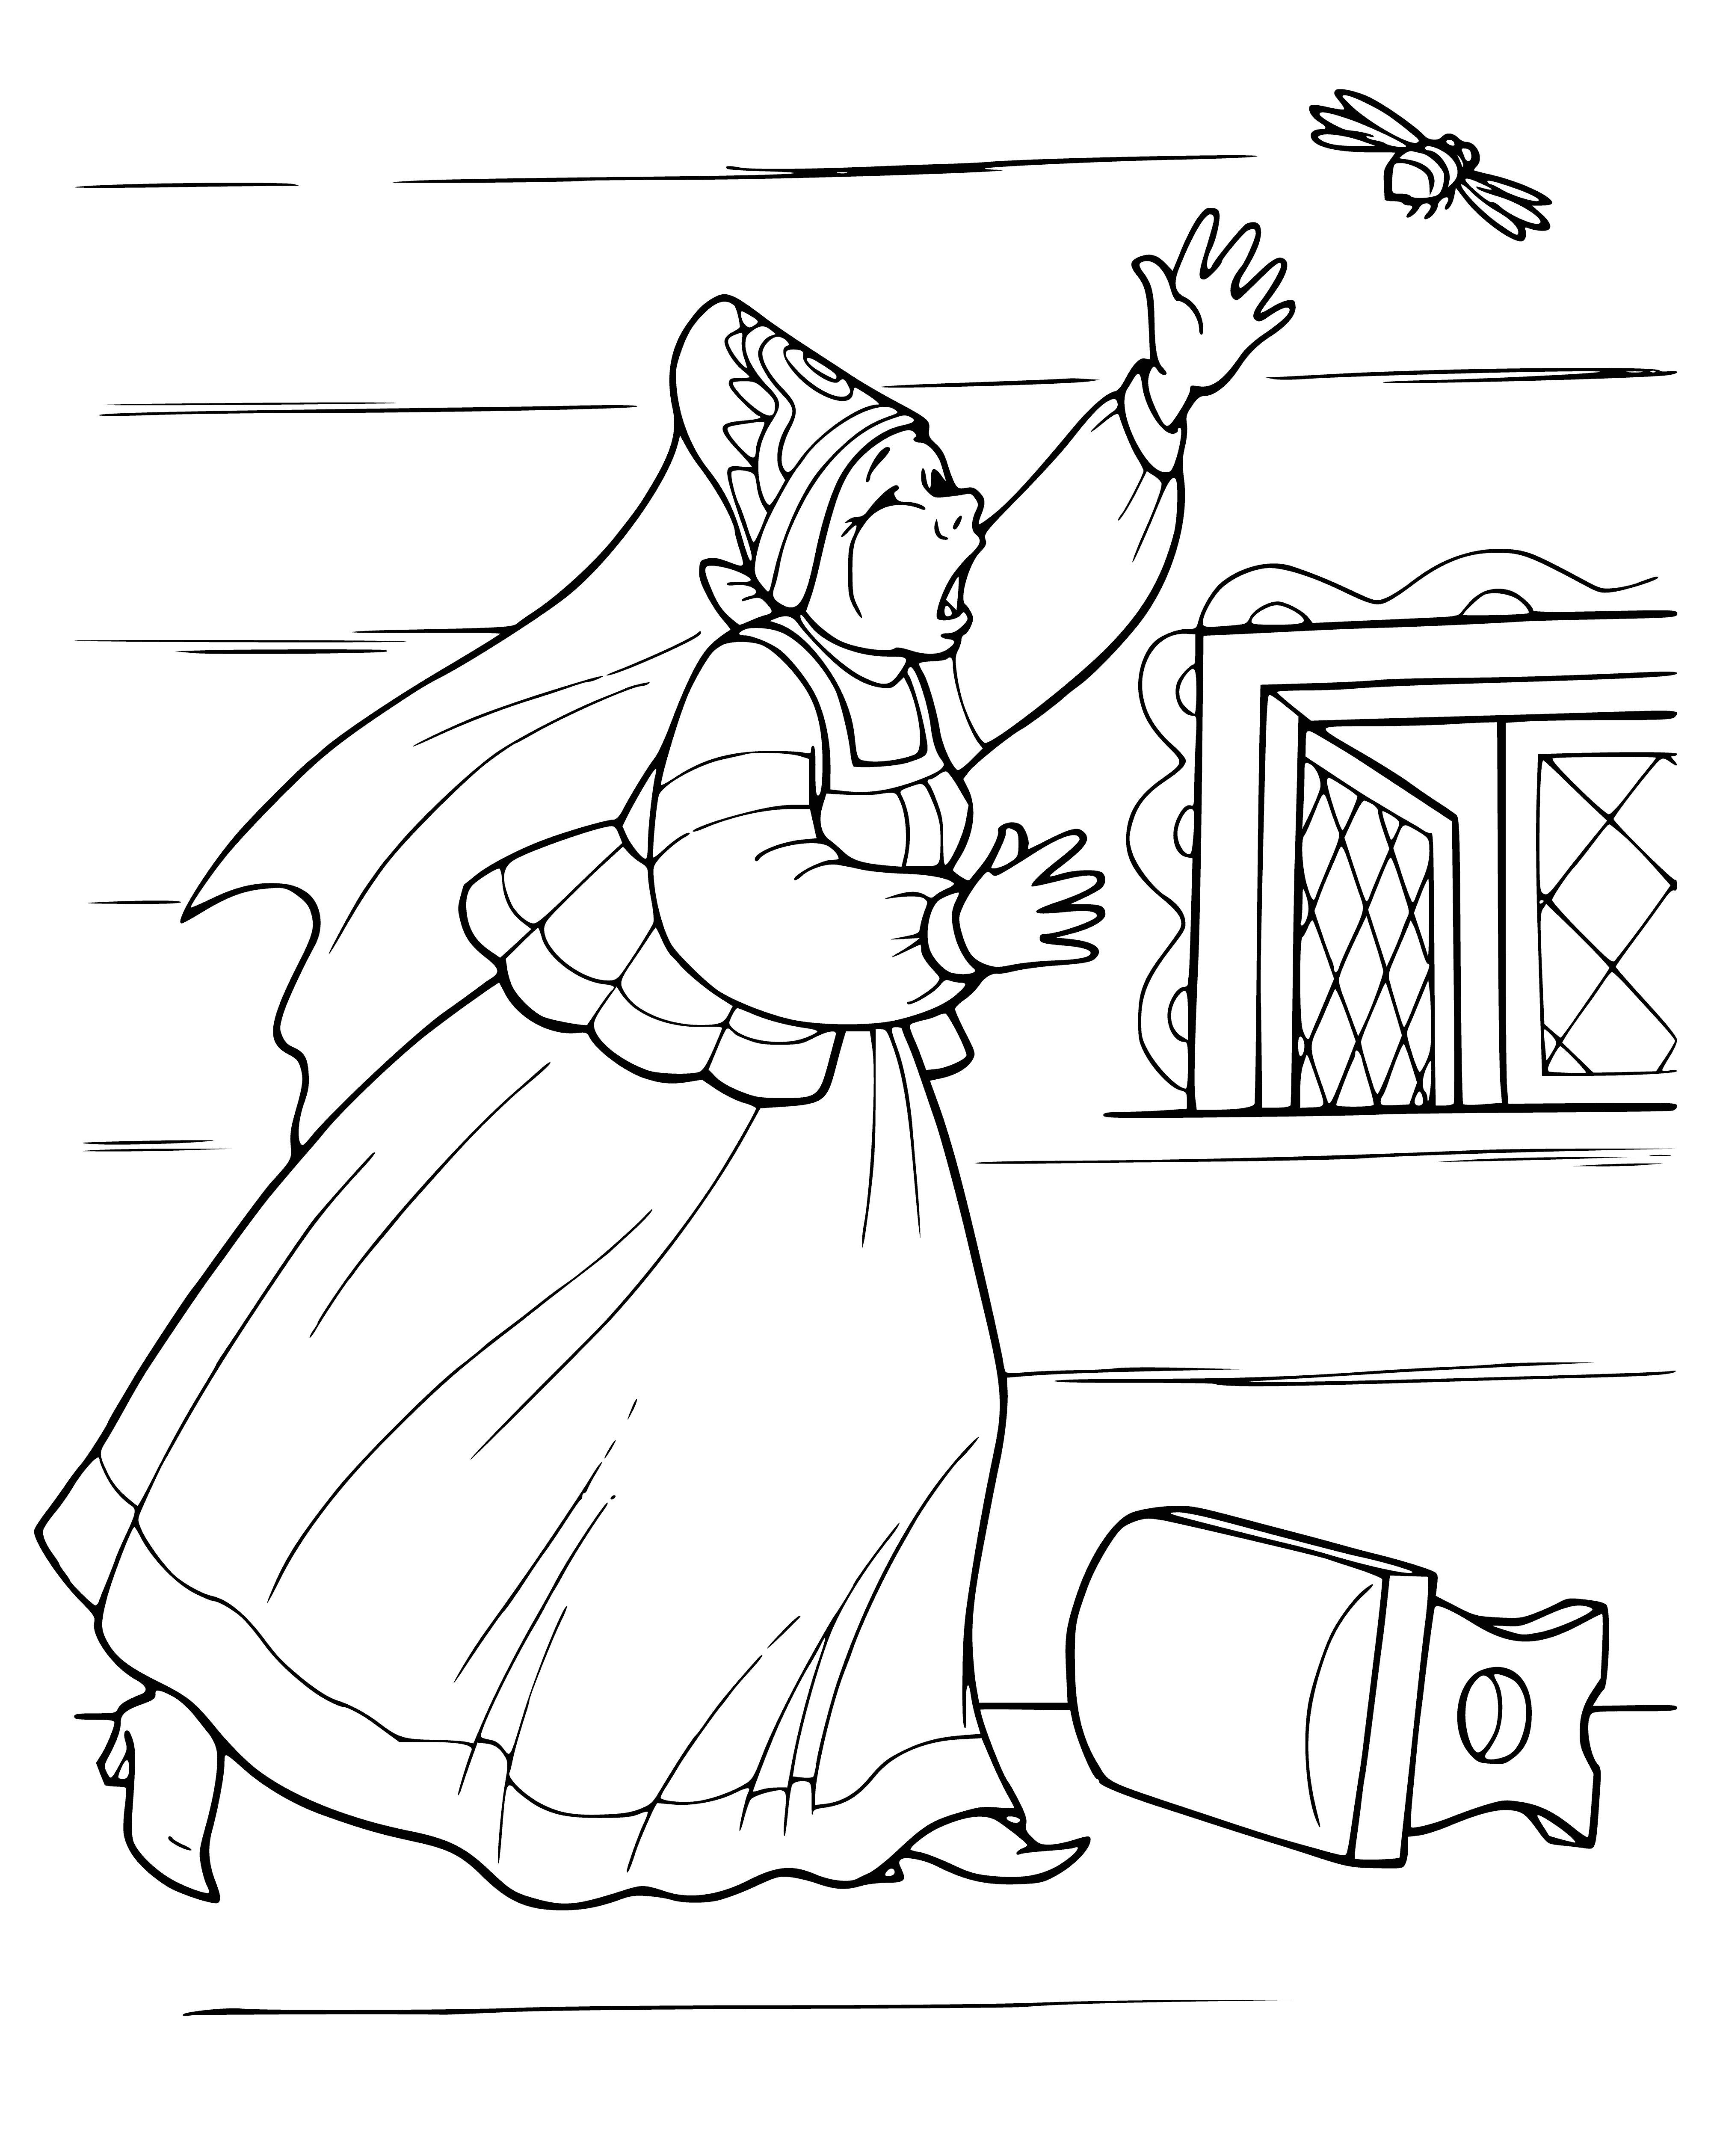 coloring page: Coloring page has a bowl of soup, plate of bread, spoon, knife, stove & window in the background.